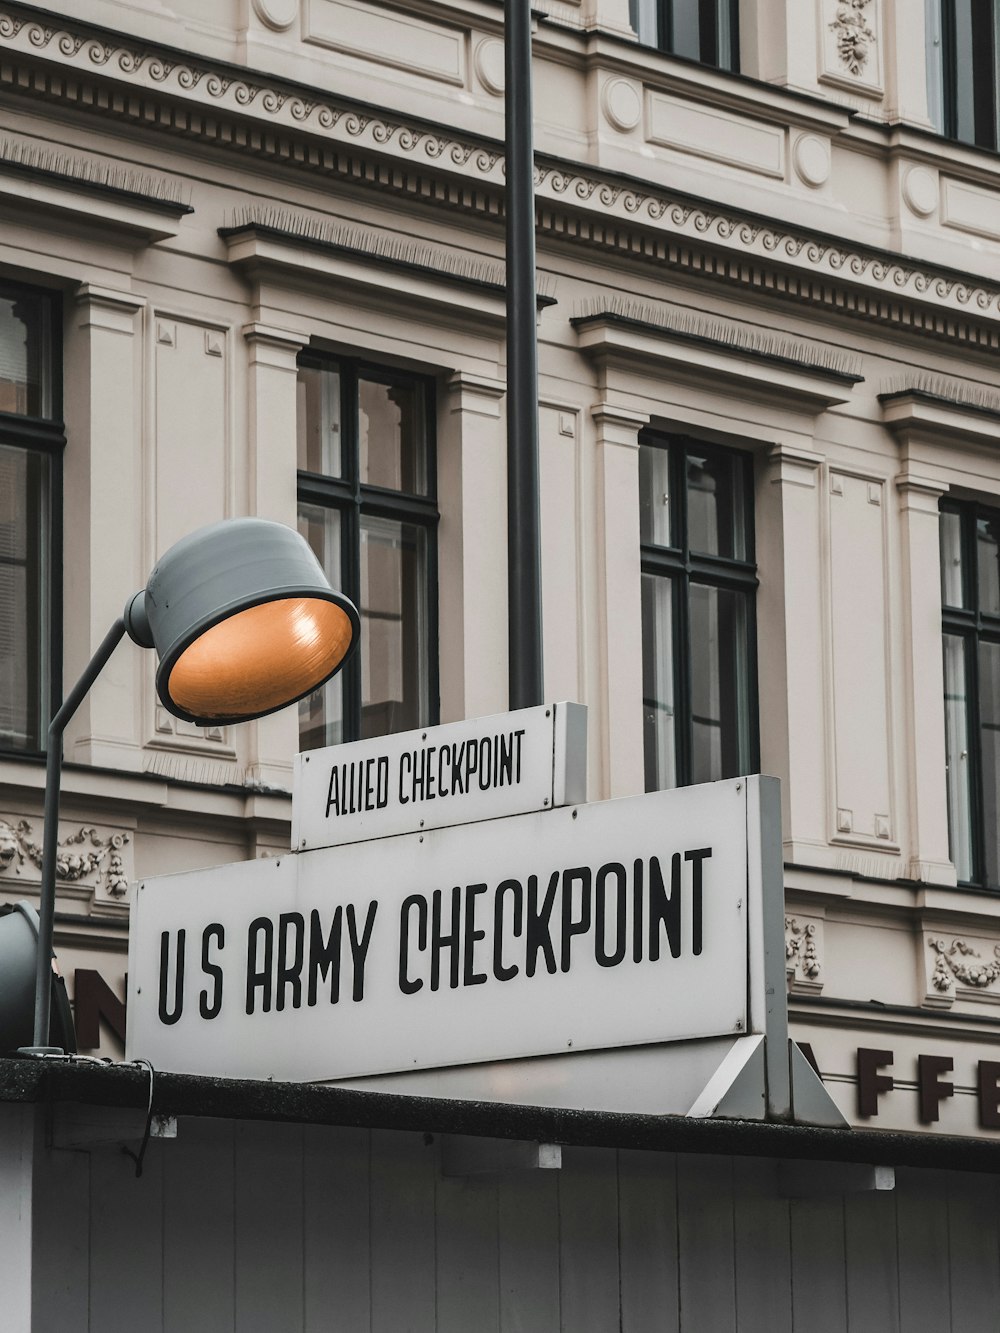 a us army checkpoint sign on the side of a building